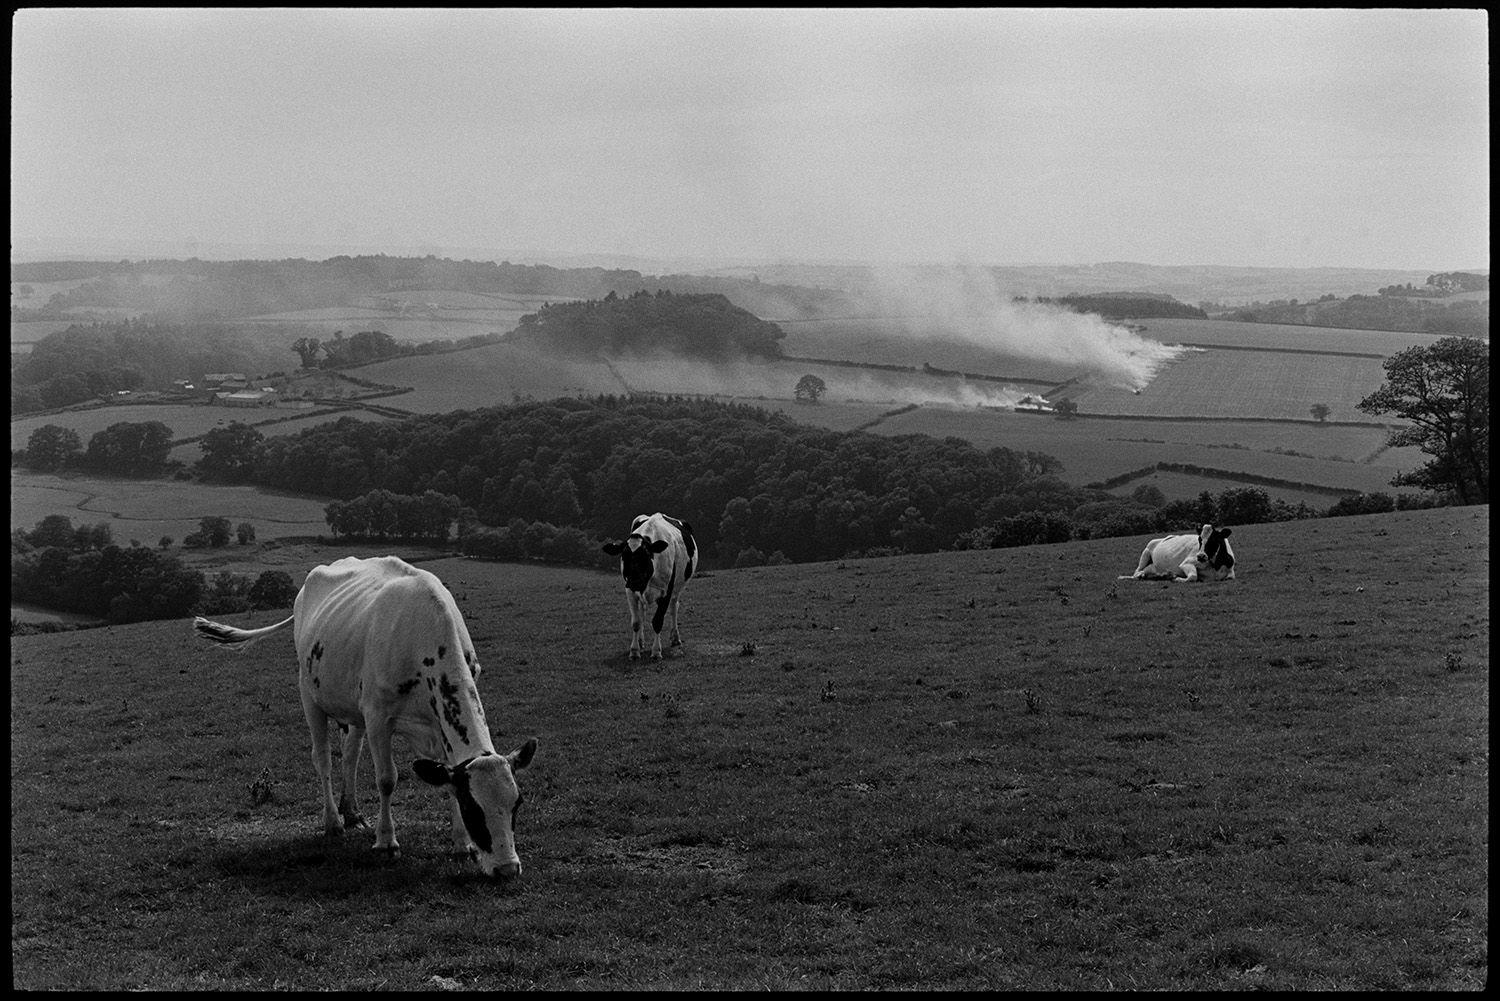 Cows in landscape with stubble burning fire in distance.
[Three cows grazing in a field above a wooded valley at South Harepath, Dolton. Smoke from burning stubble in a field is visible in the background.]